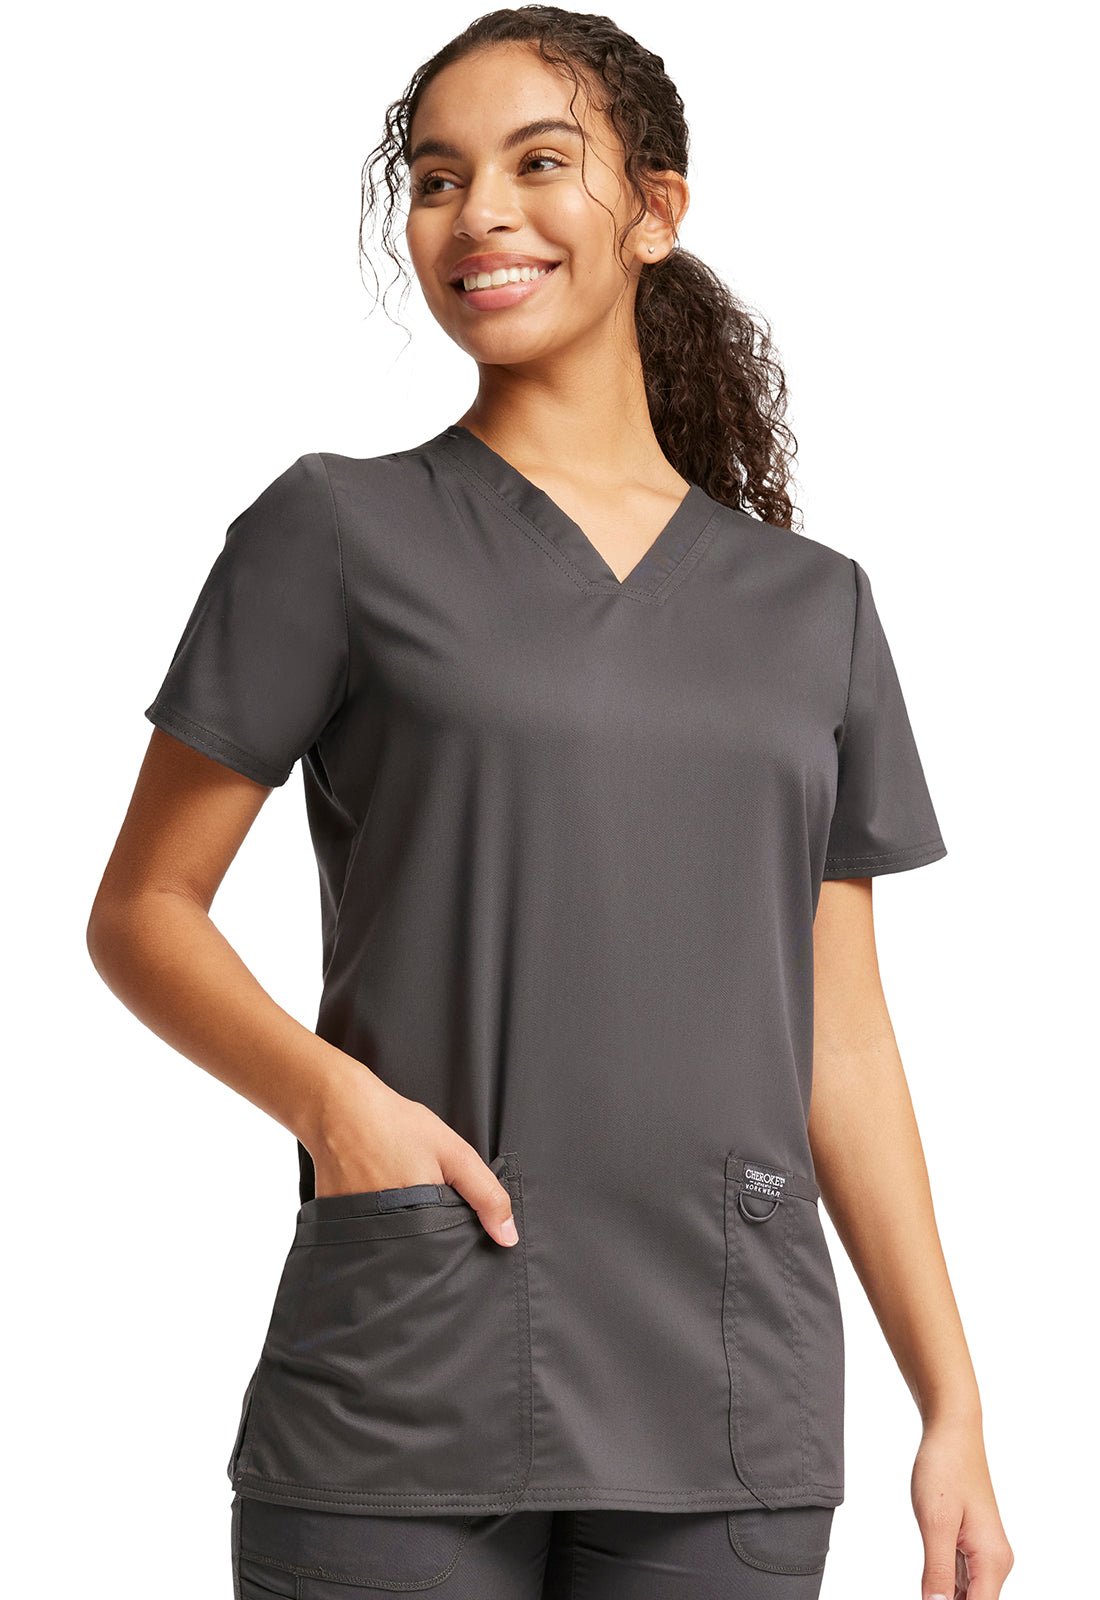 Pewter Revolution Scrubs V-NecK Top - Right Side View